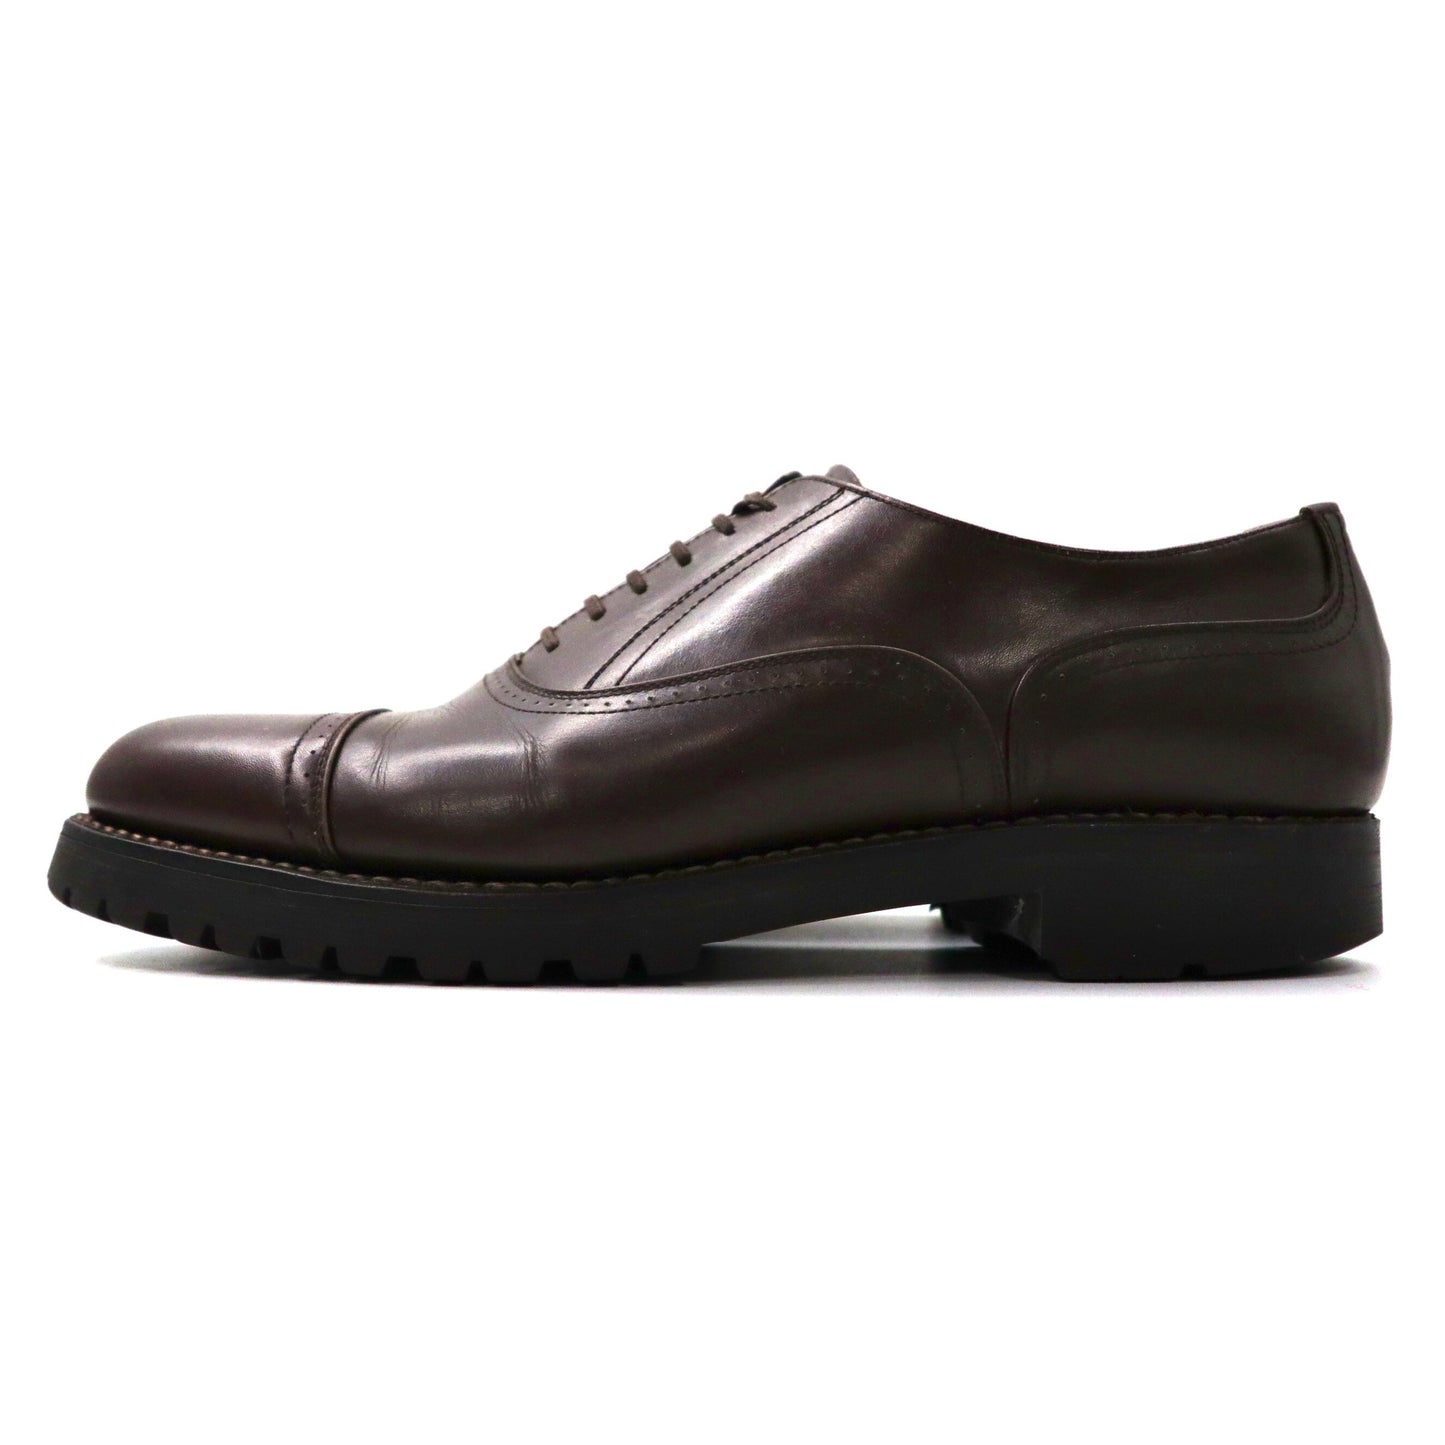 COMME des GARCONS HOMME STRAIGHT TIP Dress Shoes US7 Brown Leather ...